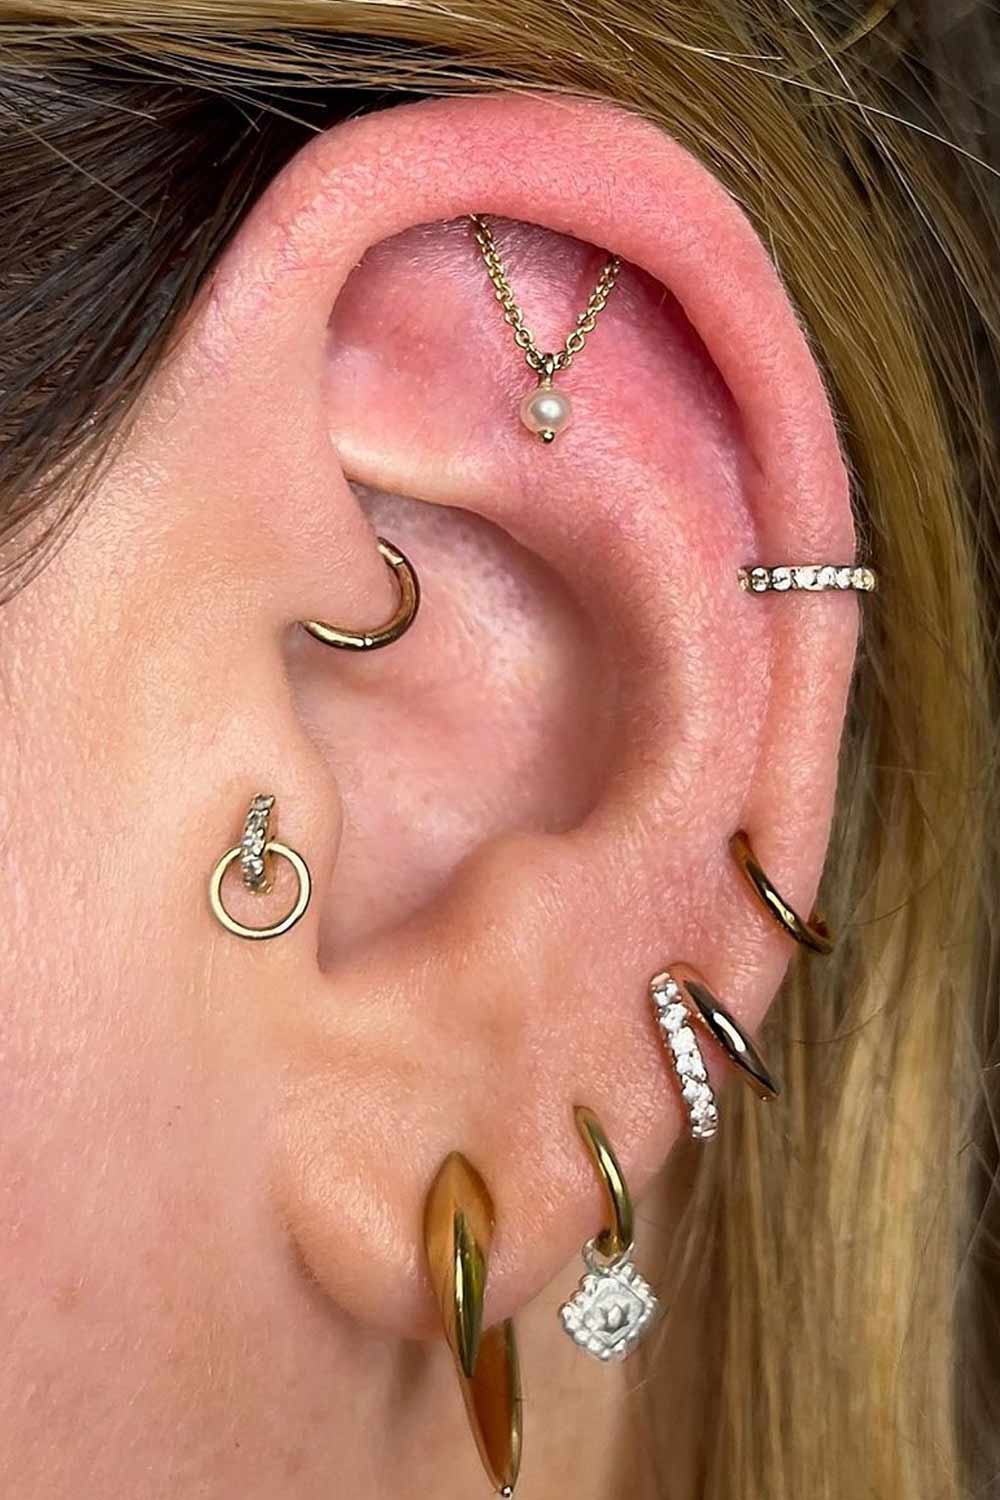 Jewelry Options for Each Type of Piercing